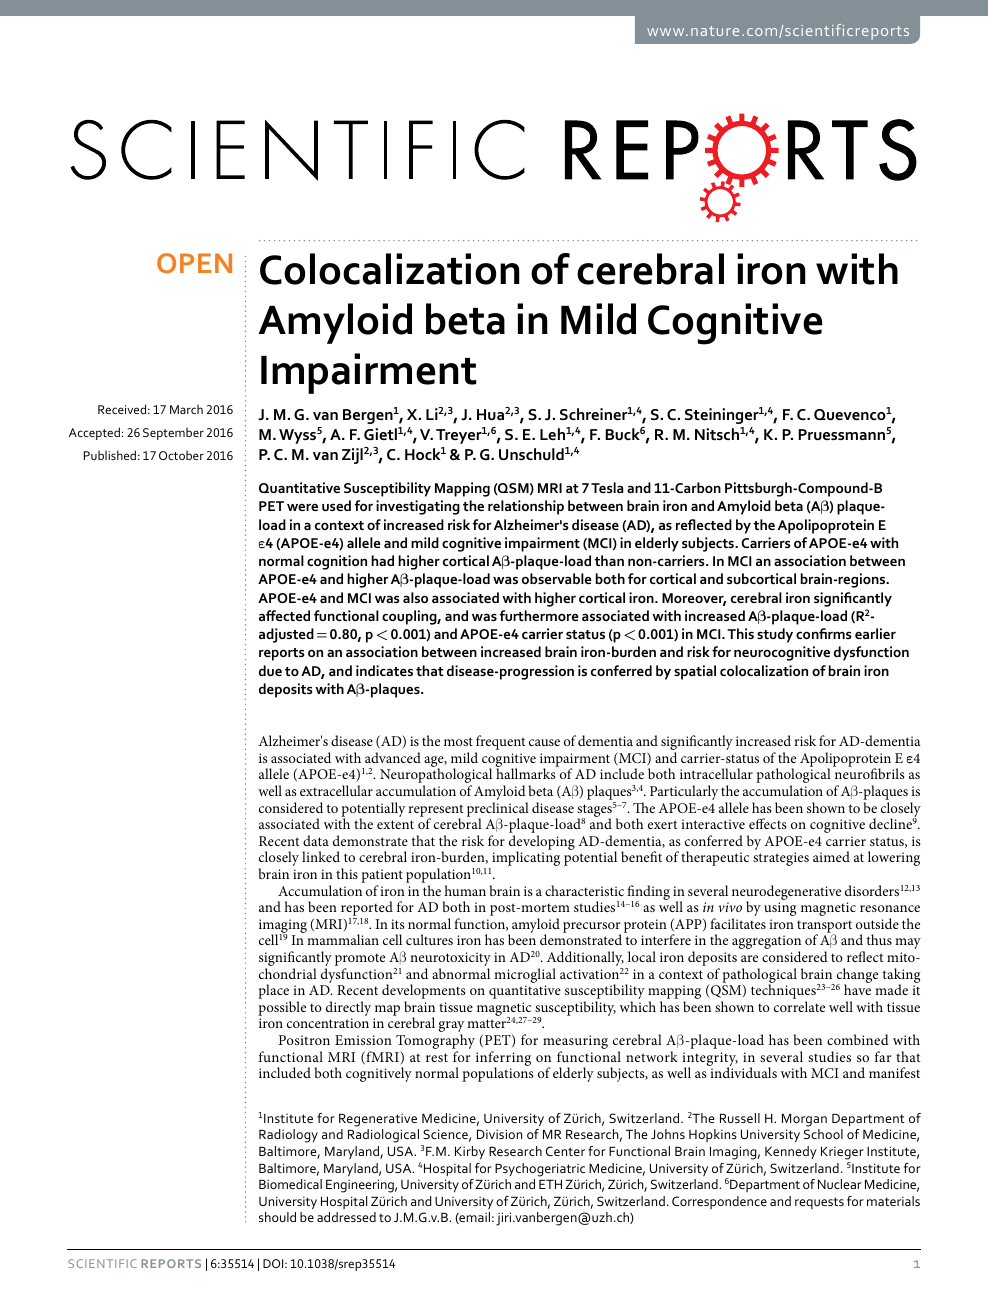 Colocalization Of Cerebral Iron With Amyloid Beta In Mild Cognitive Impairment Topic Of Research Paper In Clinical Medicine Download Scholarly Article Pdf And Read For Free On Cyberleninka Open Science Hub